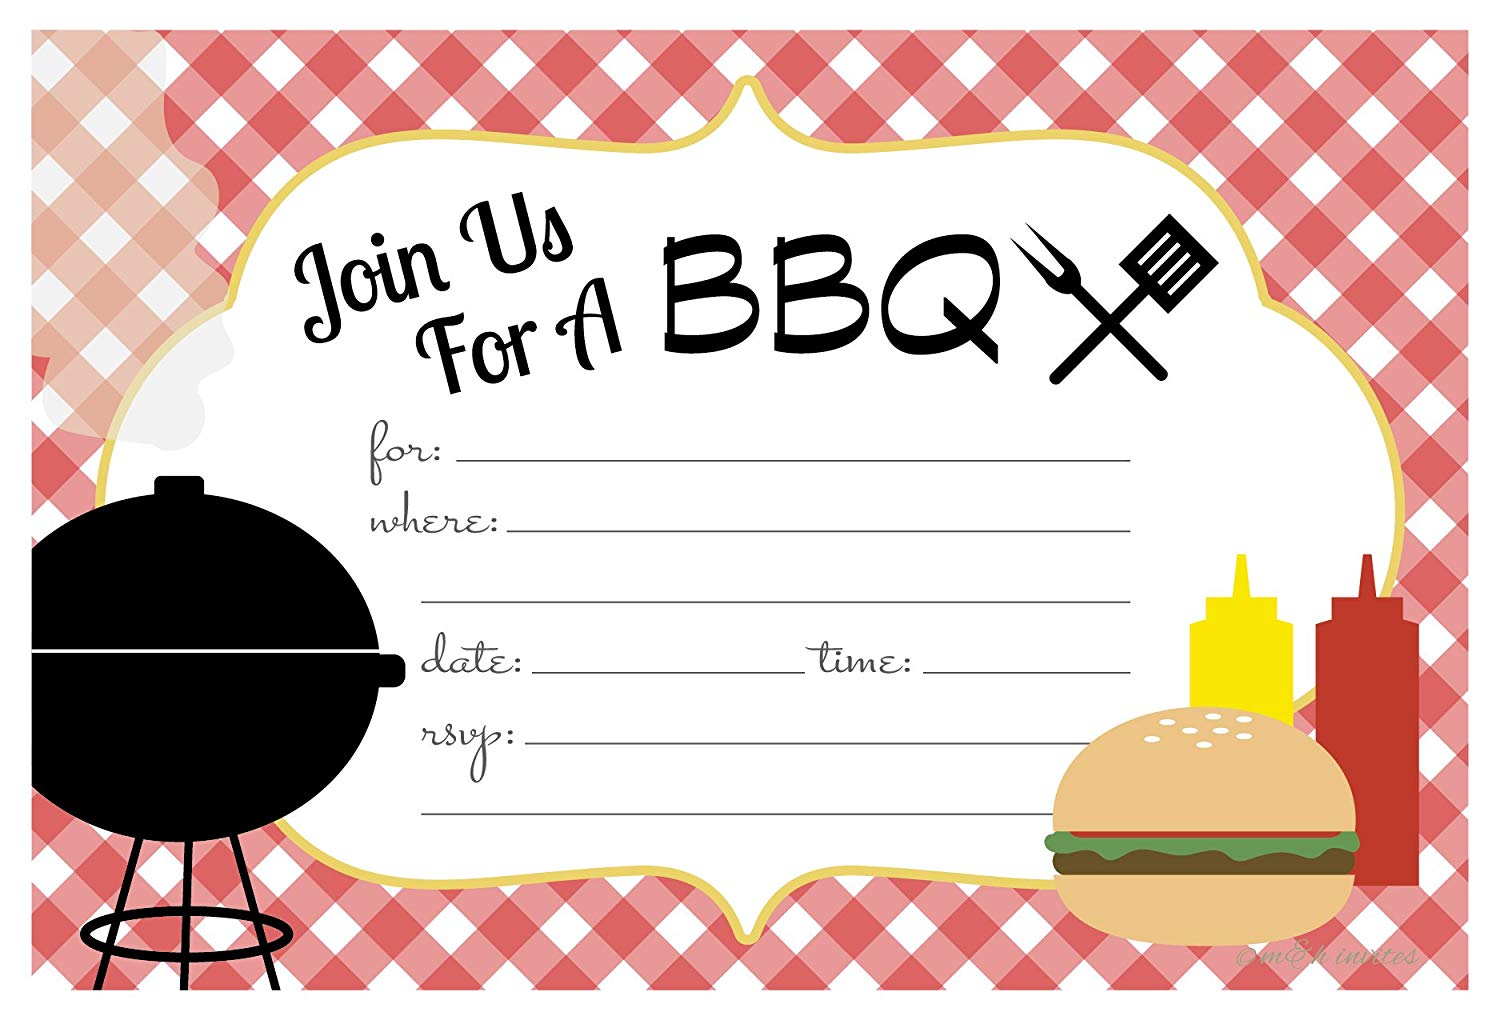 Summer bbq invitations fill. Cookout clipart blank